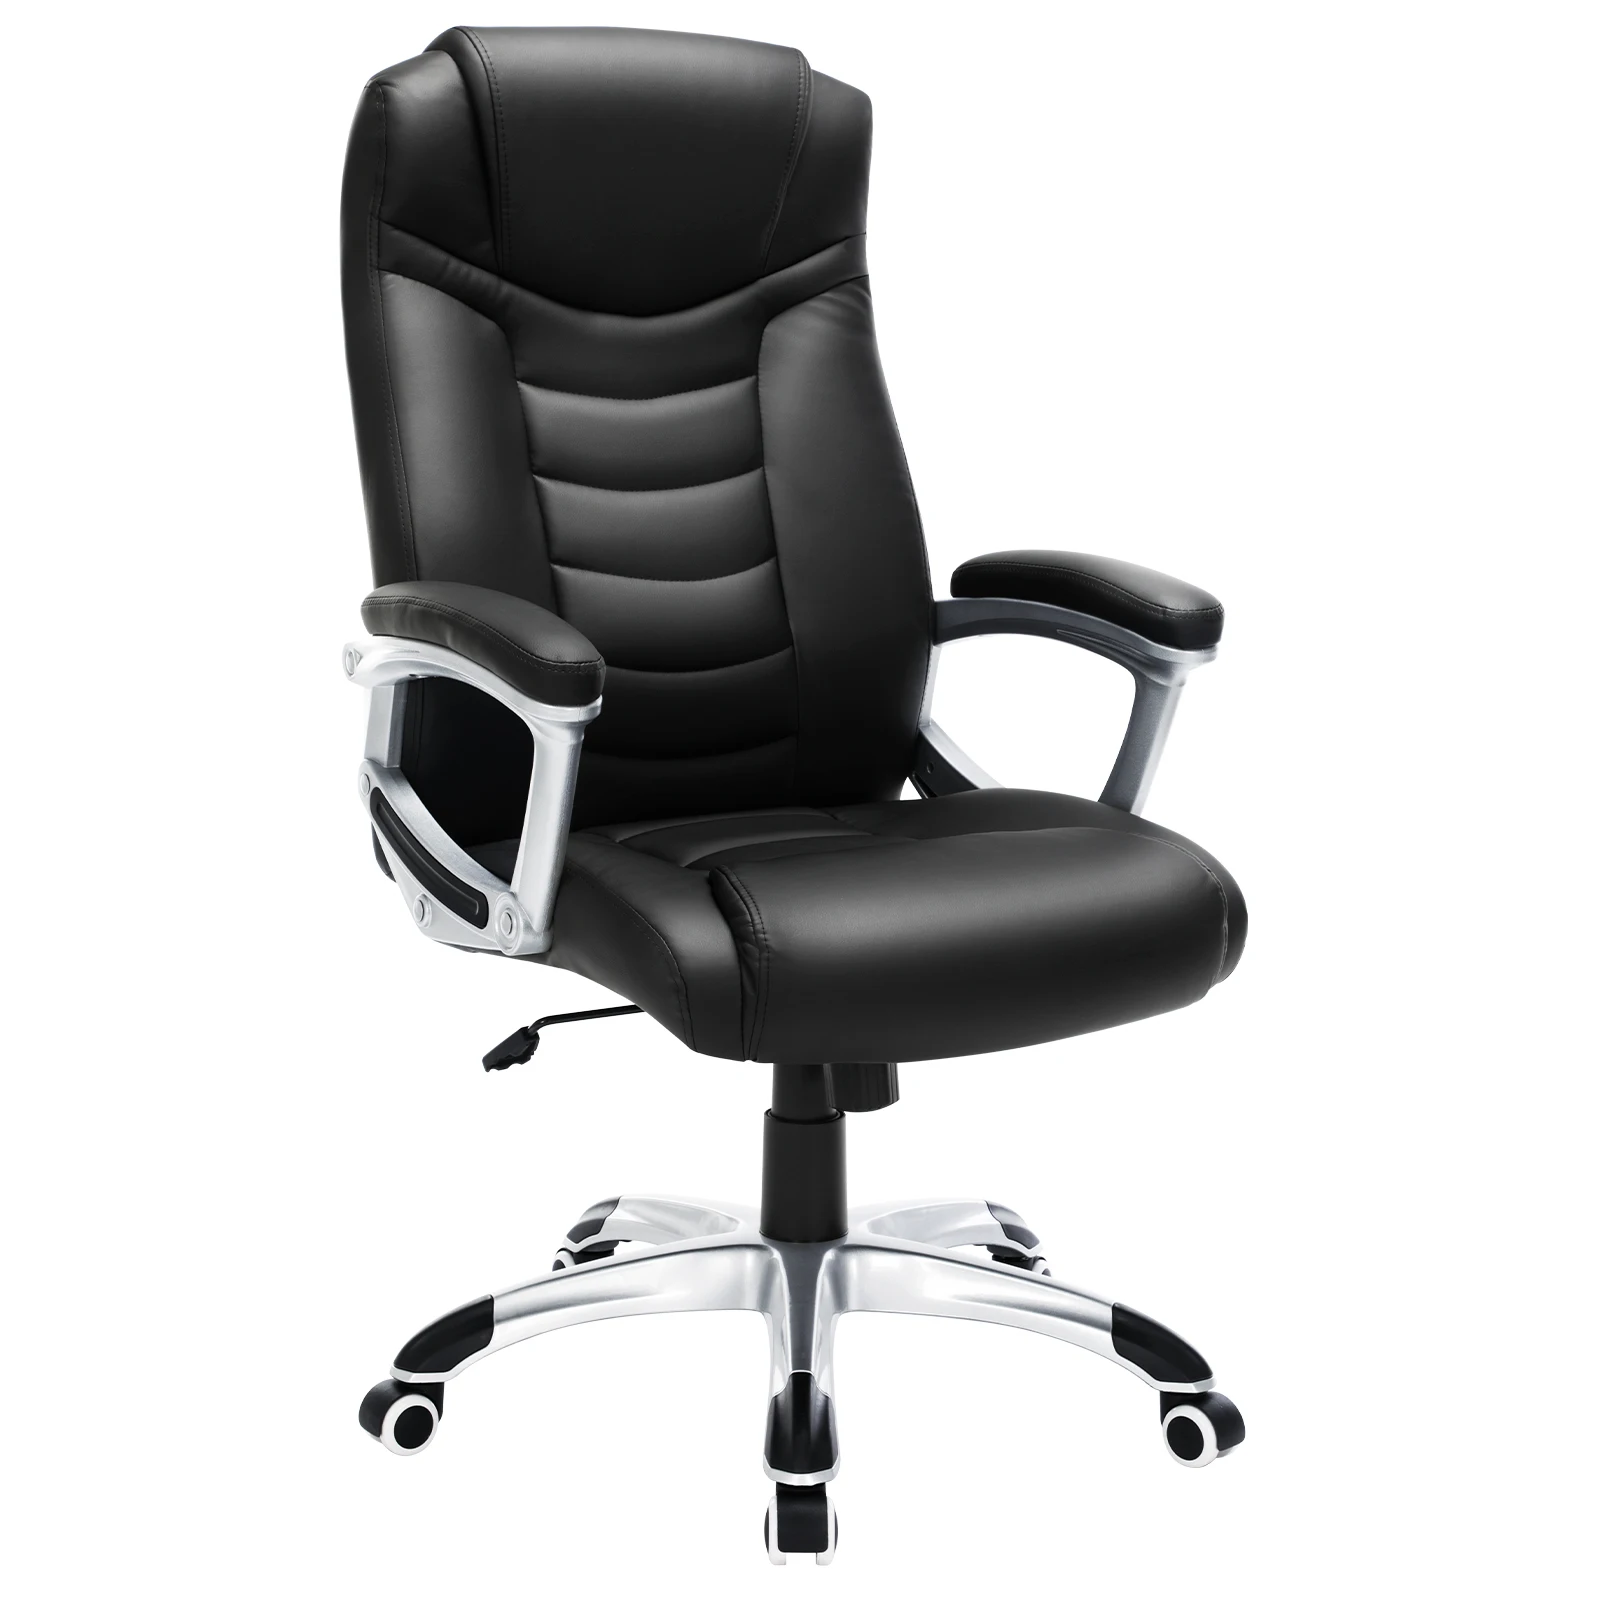 Oem Produce Executive Luxury Leather Office Chair